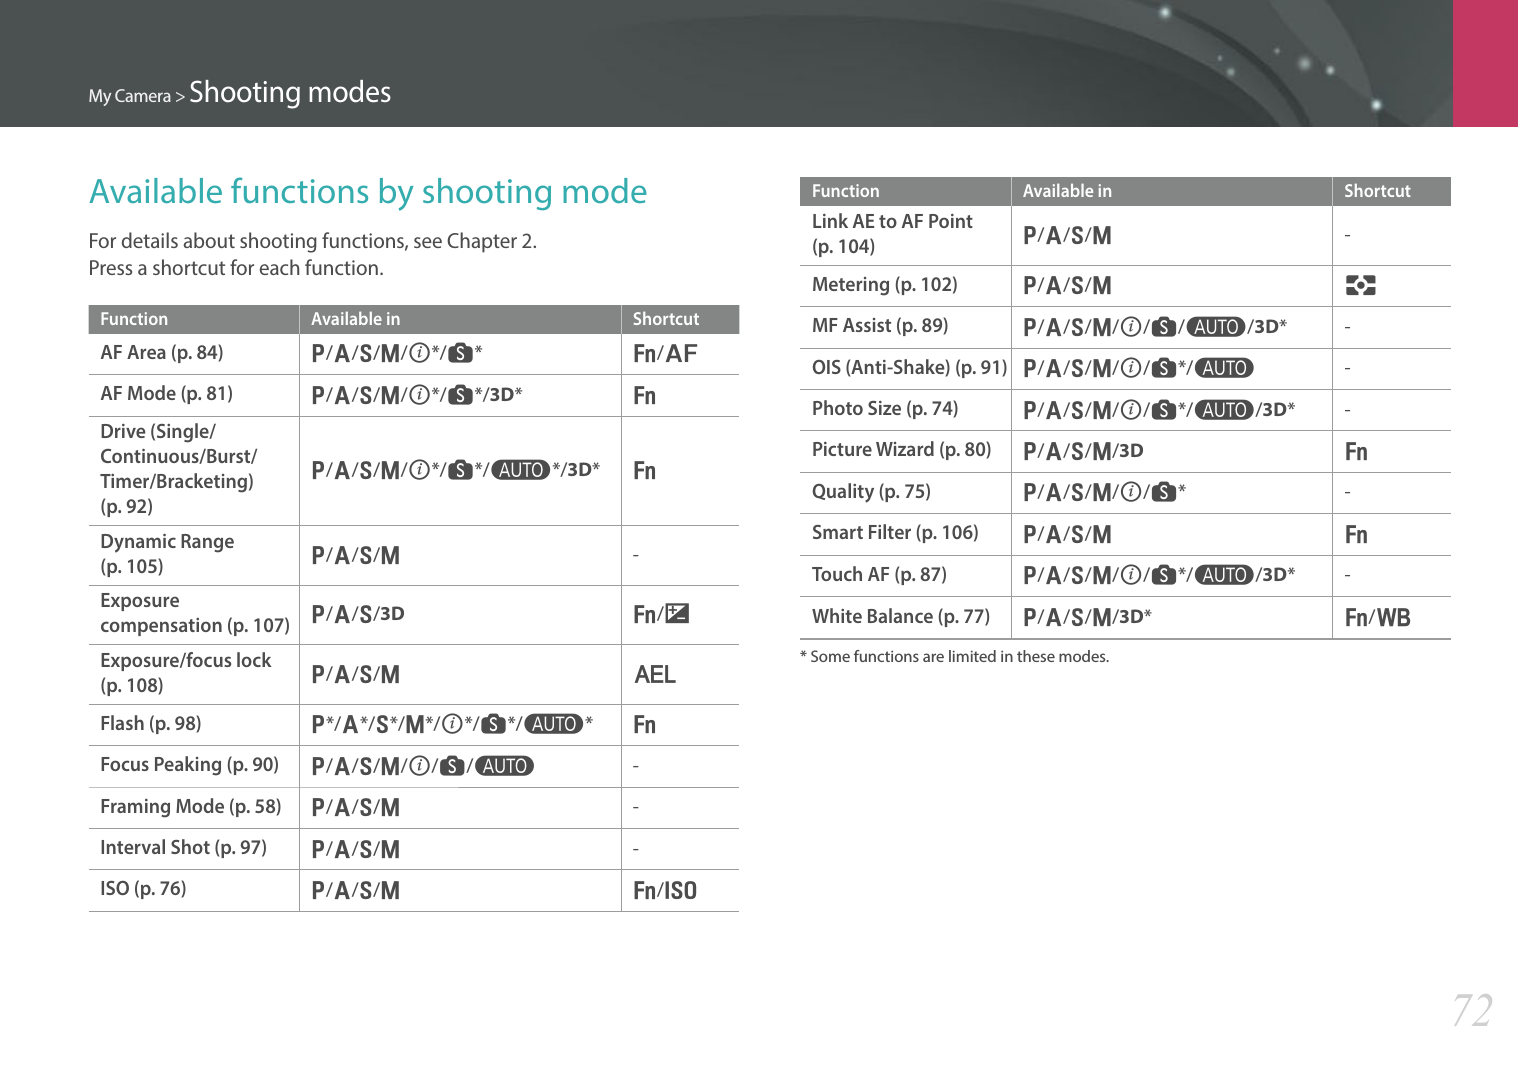 My Camera &gt; Shooting modes72Available functions by shooting modeFor details about shooting functions, see Chapter 2. Press a shortcut for each function.Function Available in ShortcutAF Area (p. 84)P/A/S/M/i*/s*f/FAF Mode (p. 81)P/A/S/M/i*/s*/3D*fDrive (Single/Continuous/Burst/Timer/Bracketing)  (p. 92)P/A/S/M/i*/s*/t*/3D*fDynamic Range  (p. 105)P/A/S/M-Exposure compensation (p. 107)P/A/S/3D f/WExposure/focus lock  (p. 108)P/A/S/MaFlash (p. 98)P*/A*/S*/M*/i*/s*/t*fFocus Peaking (p. 90)P/A/S/M/i/s/t-Framing Mode (p. 58)P/A/S/M-Interval Shot (p. 97)P/A/S/M-ISO (p. 76)P/A/S/Mf/IFunction Available in ShortcutLink AE to AF Point  (p. 104)P/A/S/M-Metering (p. 102)P/A/S/MNMF Assist (p. 89)P/A/S/M/i/s/t/3D*-OIS (Anti-Shake) (p. 91)P/A/S/M/i/s*/t-Photo Size (p. 74)P/A/S/M/i/s*/t/3D*-Picture Wizard (p. 80)P/A/S/M/3D fQuality (p. 75)P/A/S/M/i/s*-Smart Filter (p. 106)P/A/S/MfTouch AF (p. 87)P/A/S/M/i/s*/t/3D*-White Balance (p. 77)P/A/S/M/3D*f/C *  Some functions are limited in these modes.